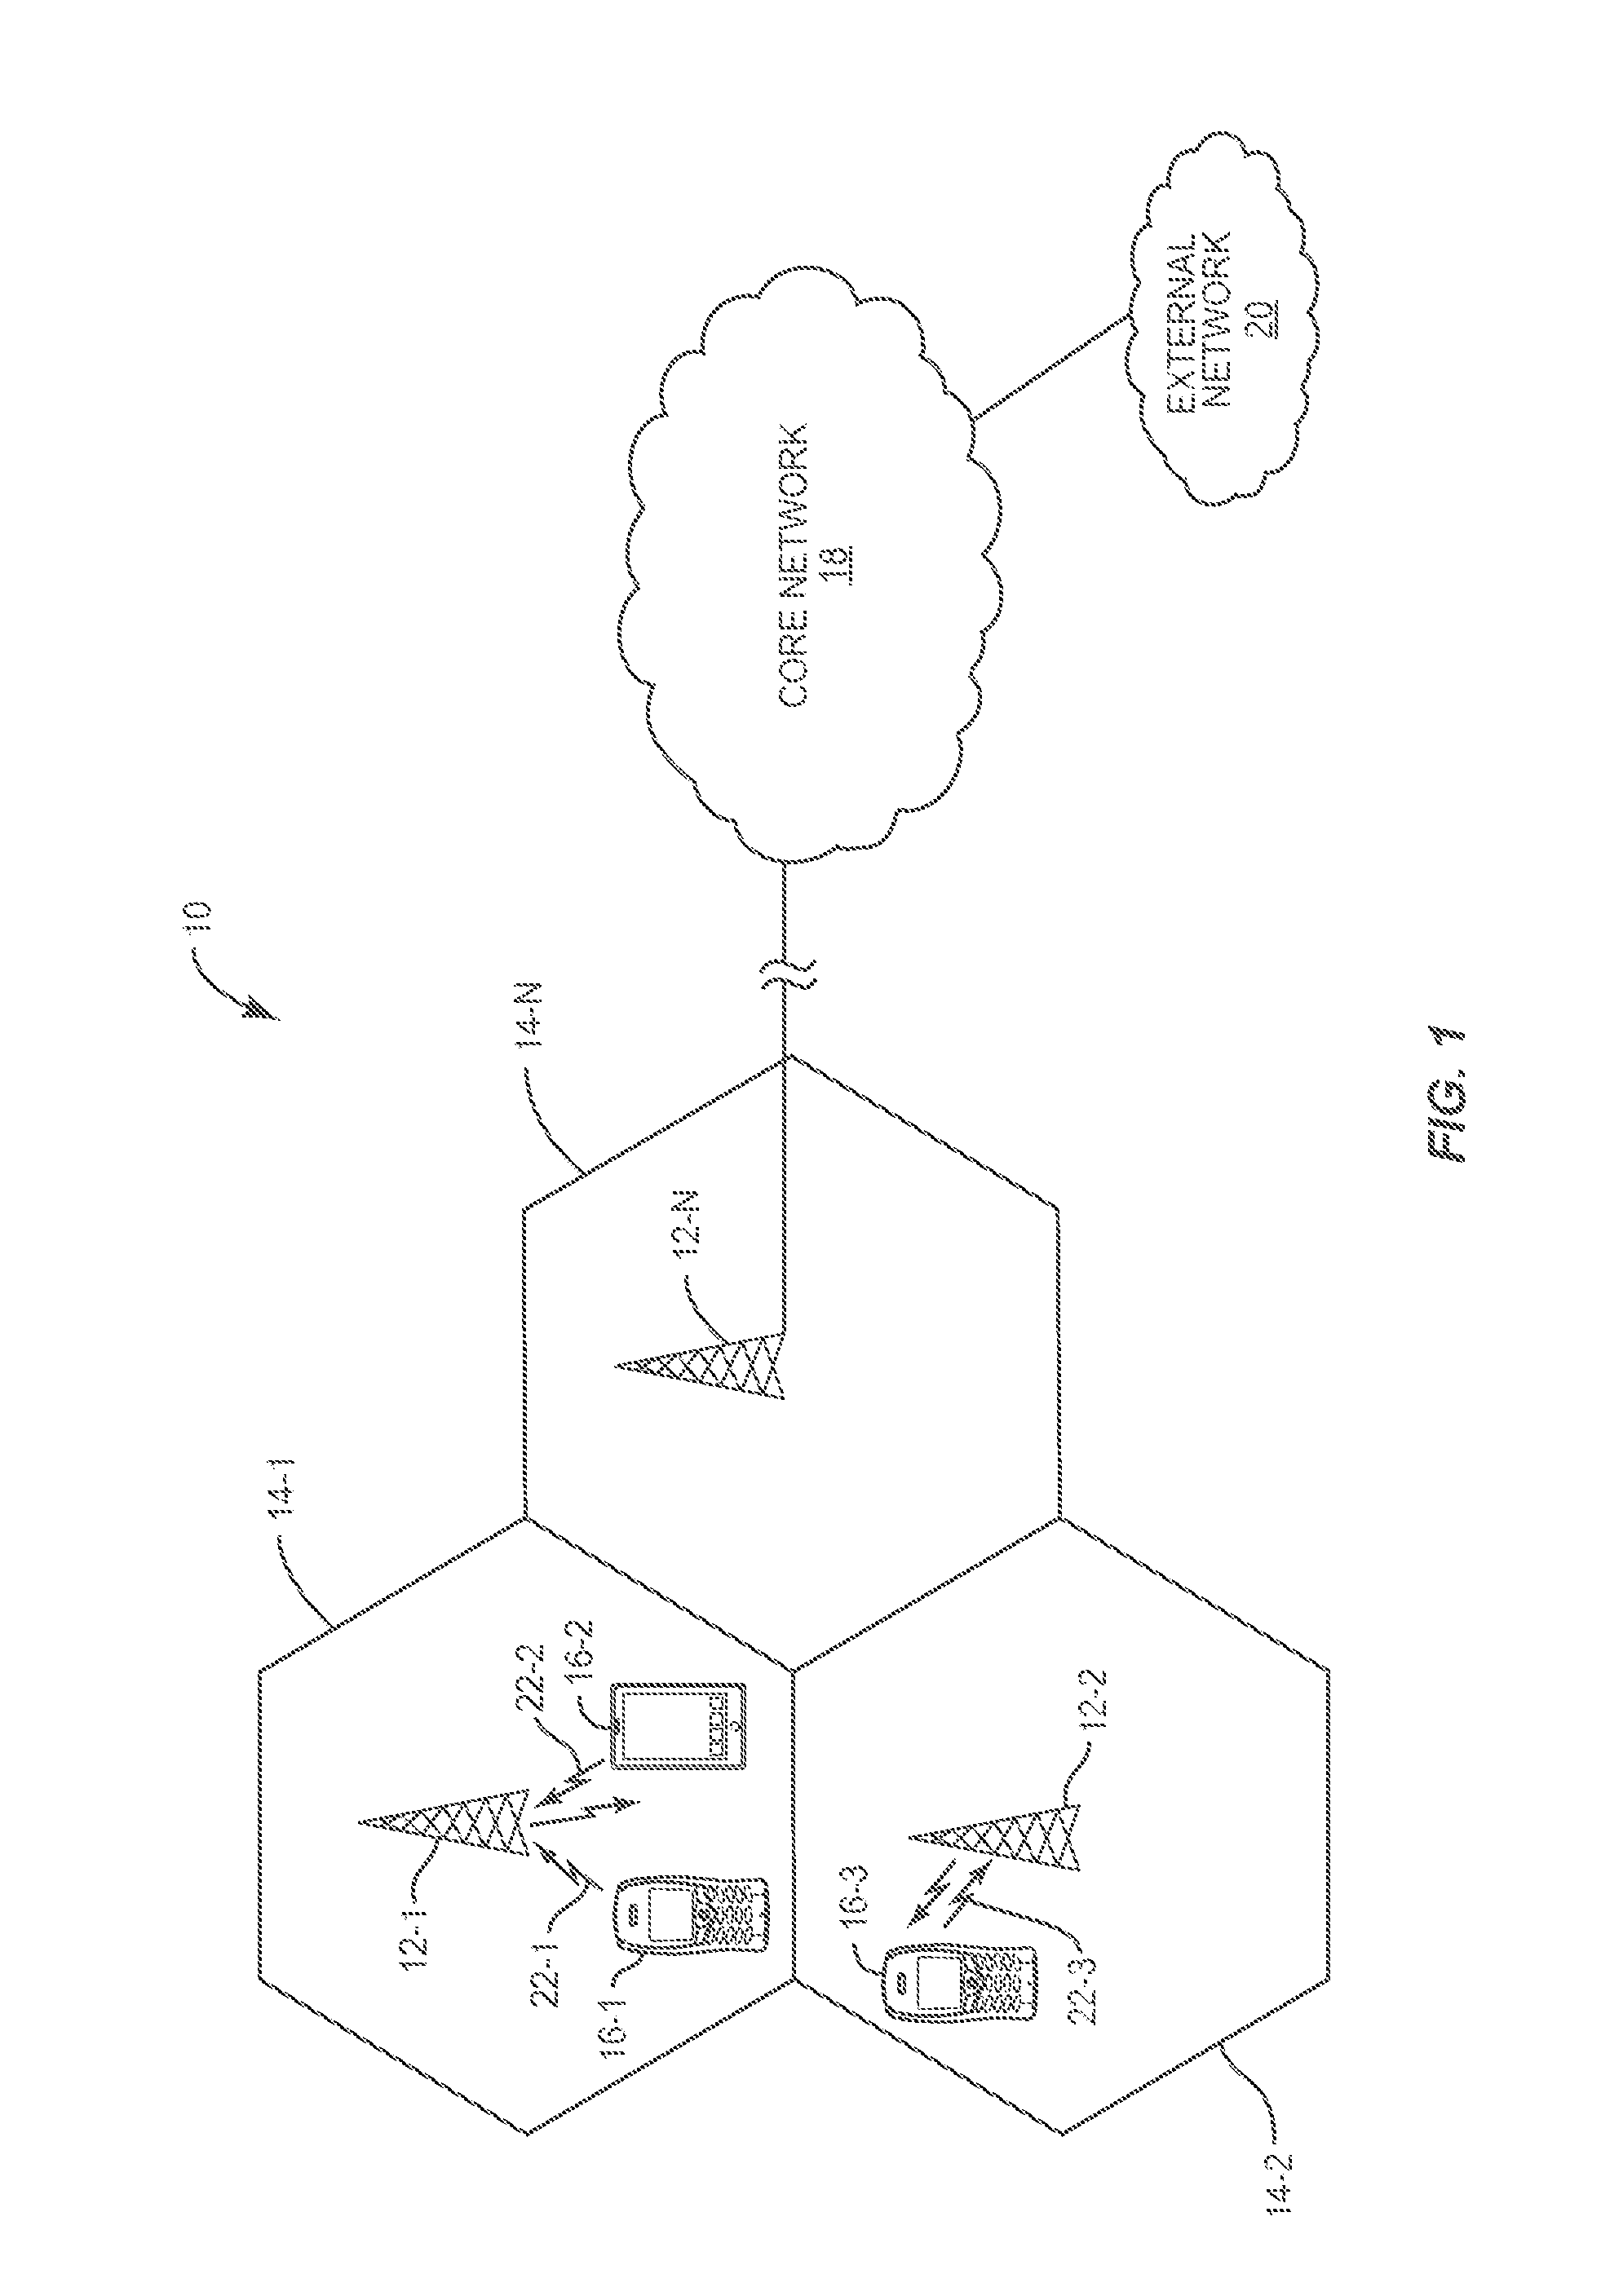 Signaling of sequence generator initialization parameters for uplink reference signal generation